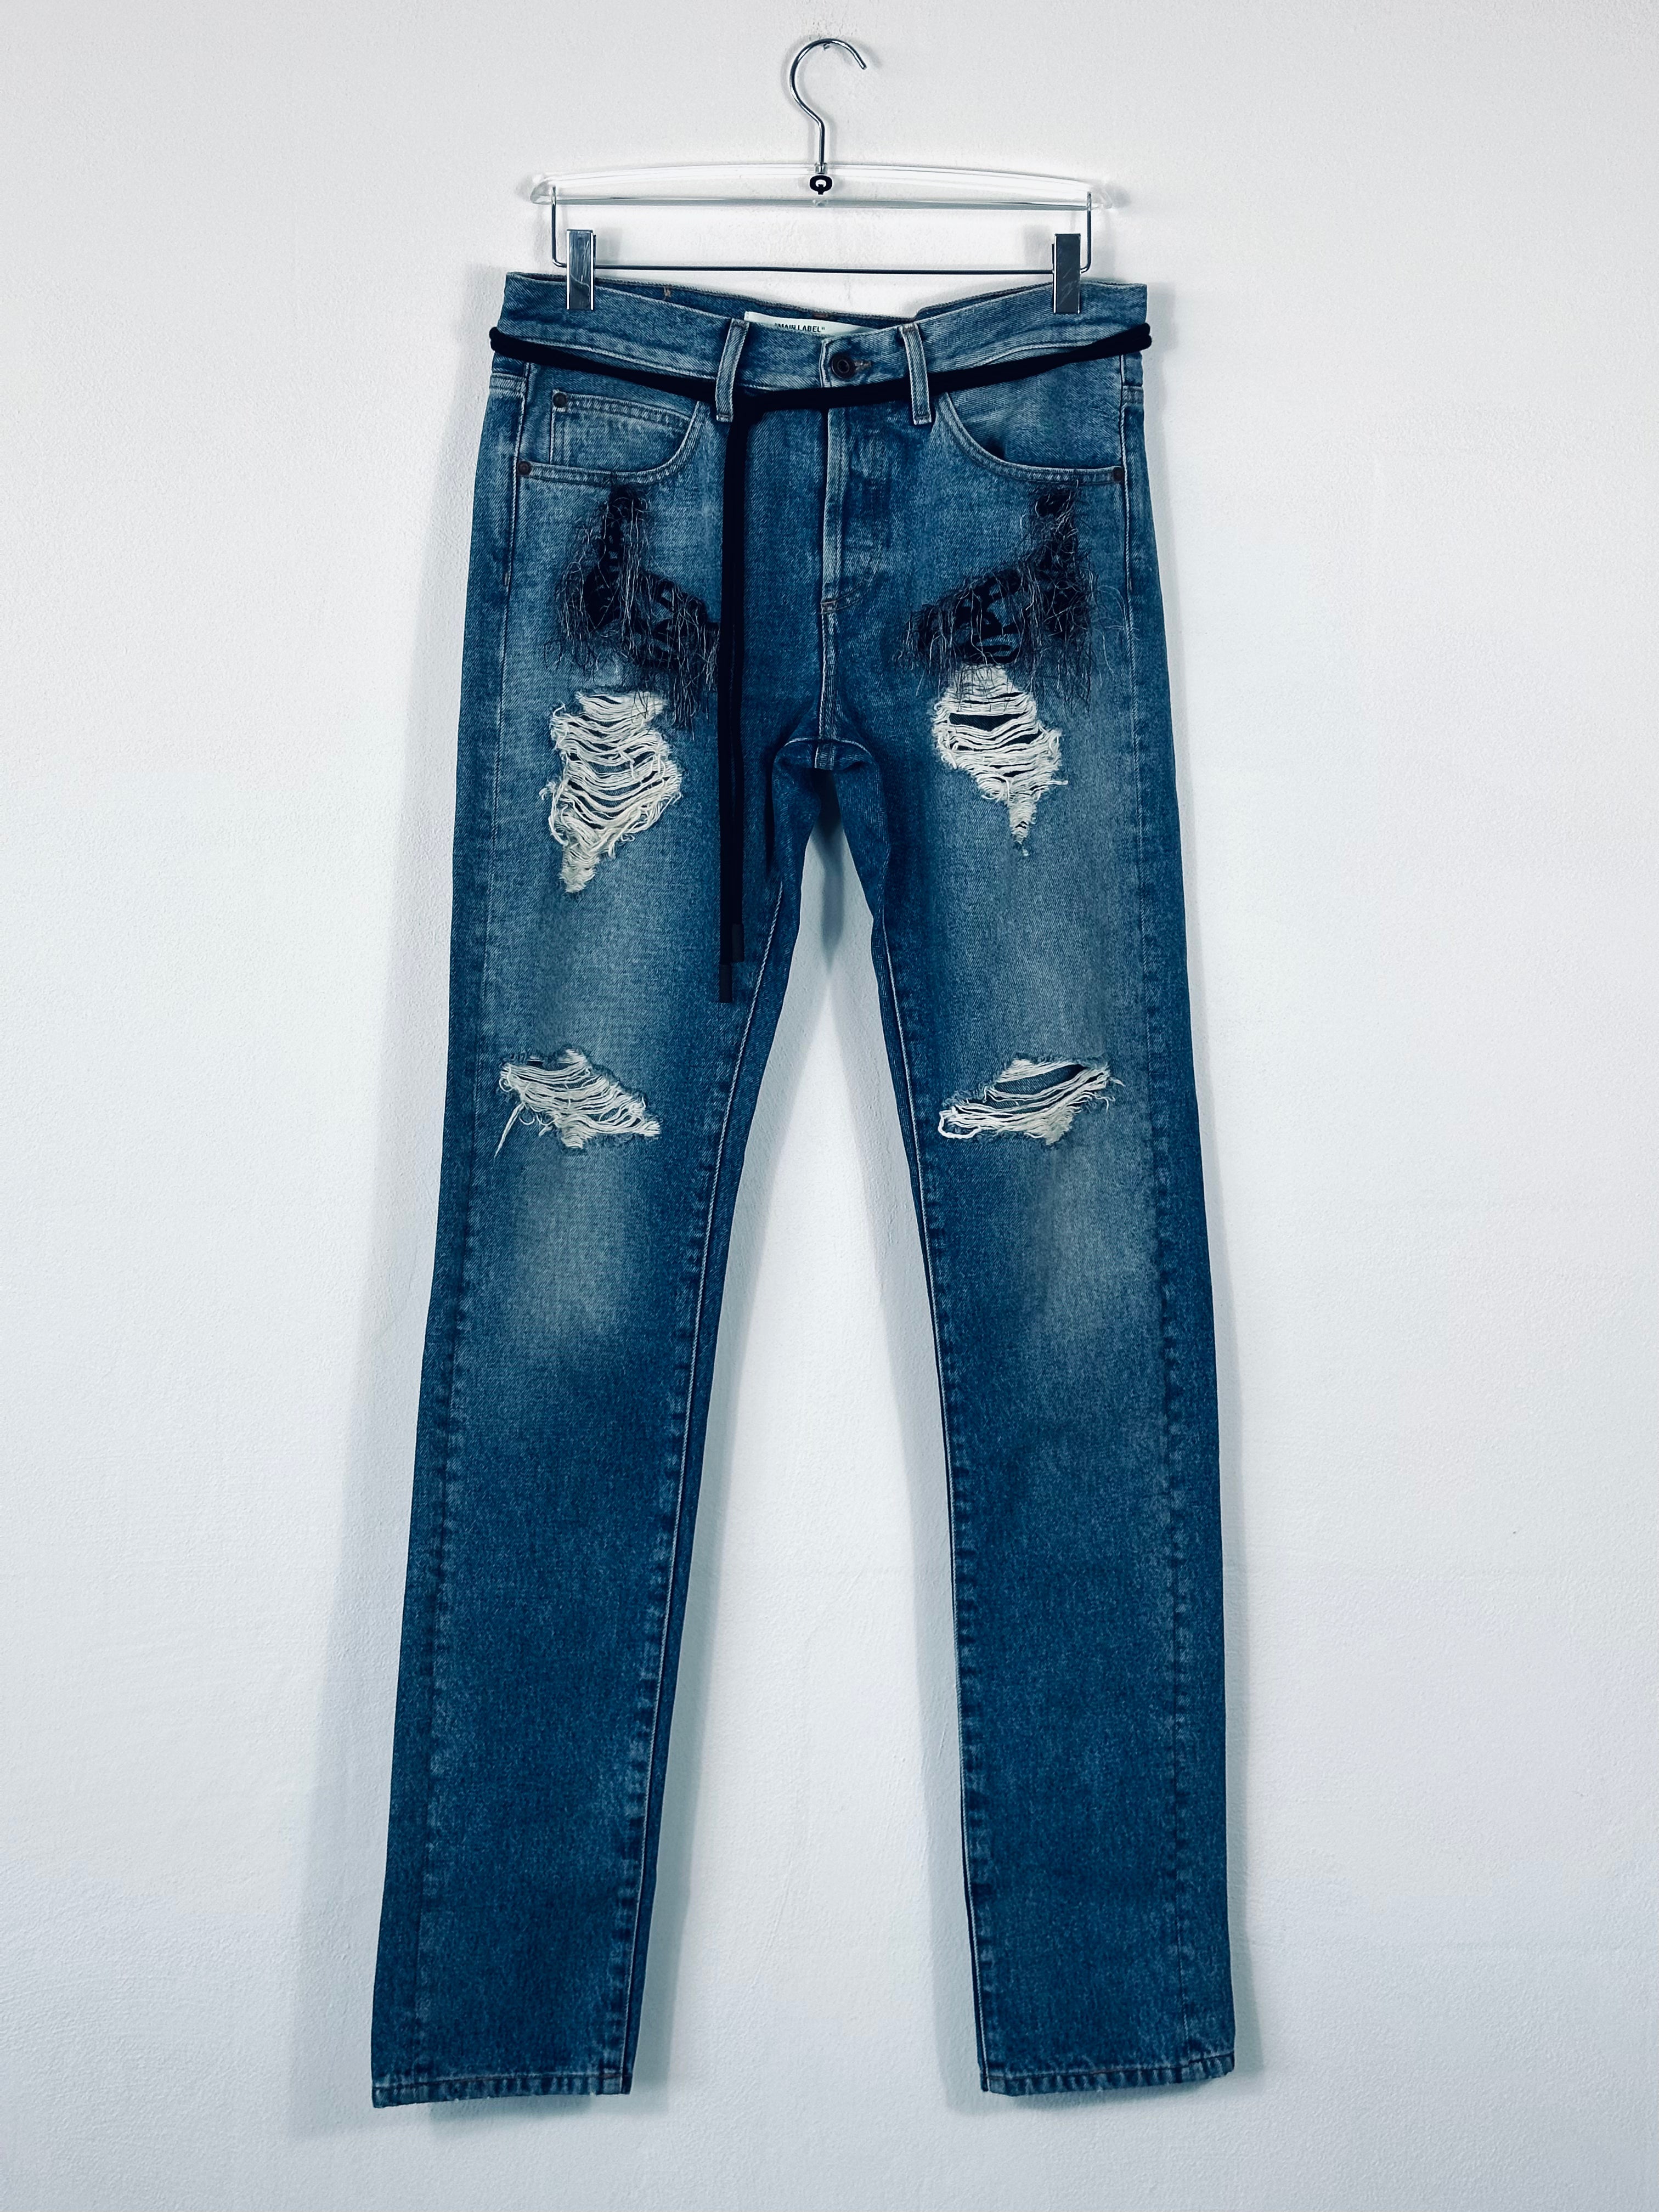 Ripped and Frayed Jeans